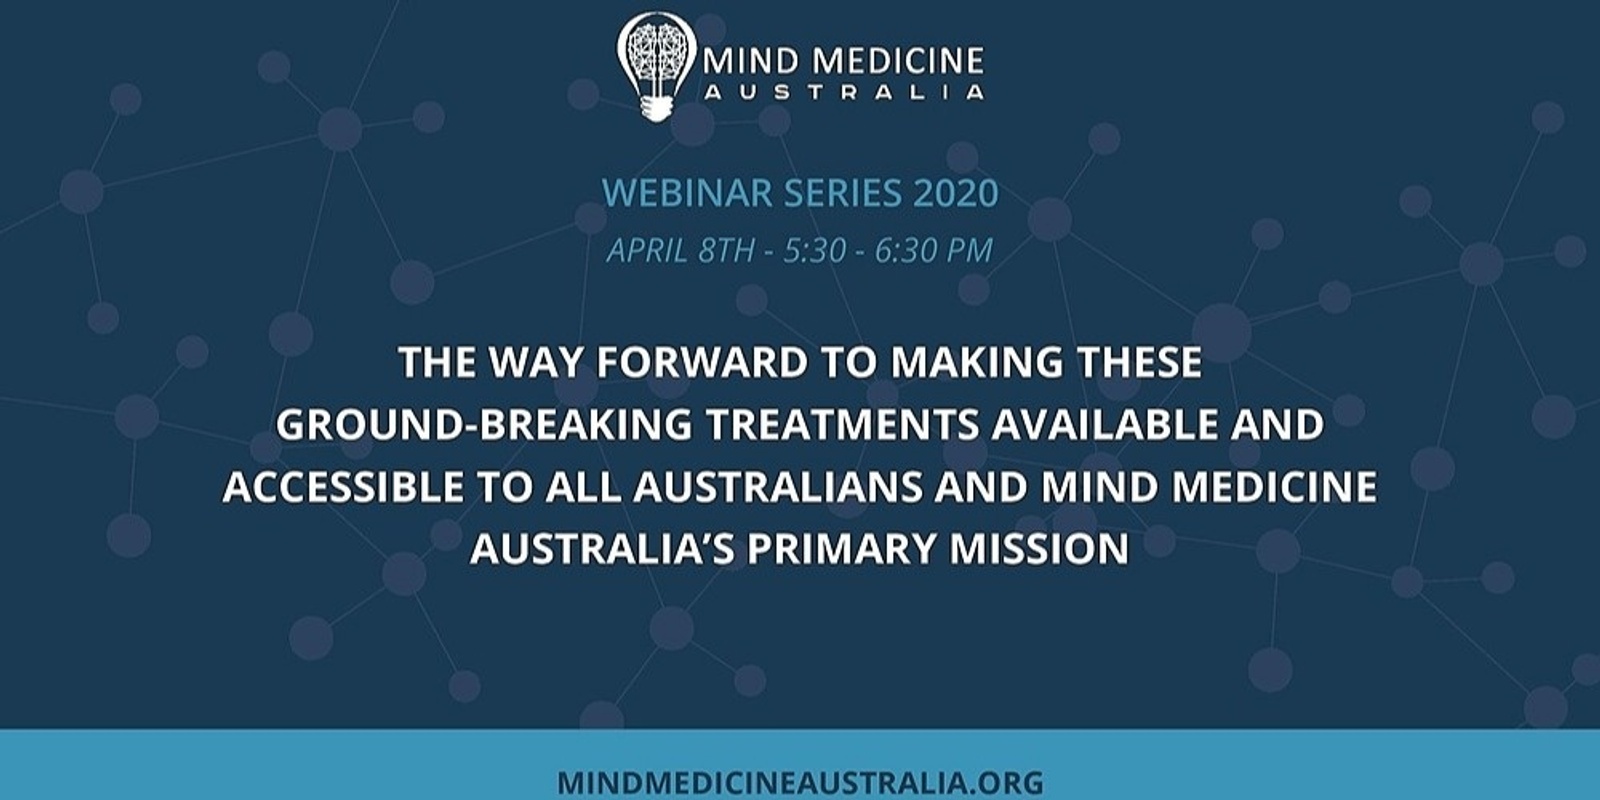 Banner image for Mind Medicine Australia Webinar Series - The Way Forward to Making These Ground-breaking Treatments Available and Accessible to all Australians and Mind Medicine Australia's Primary Mission